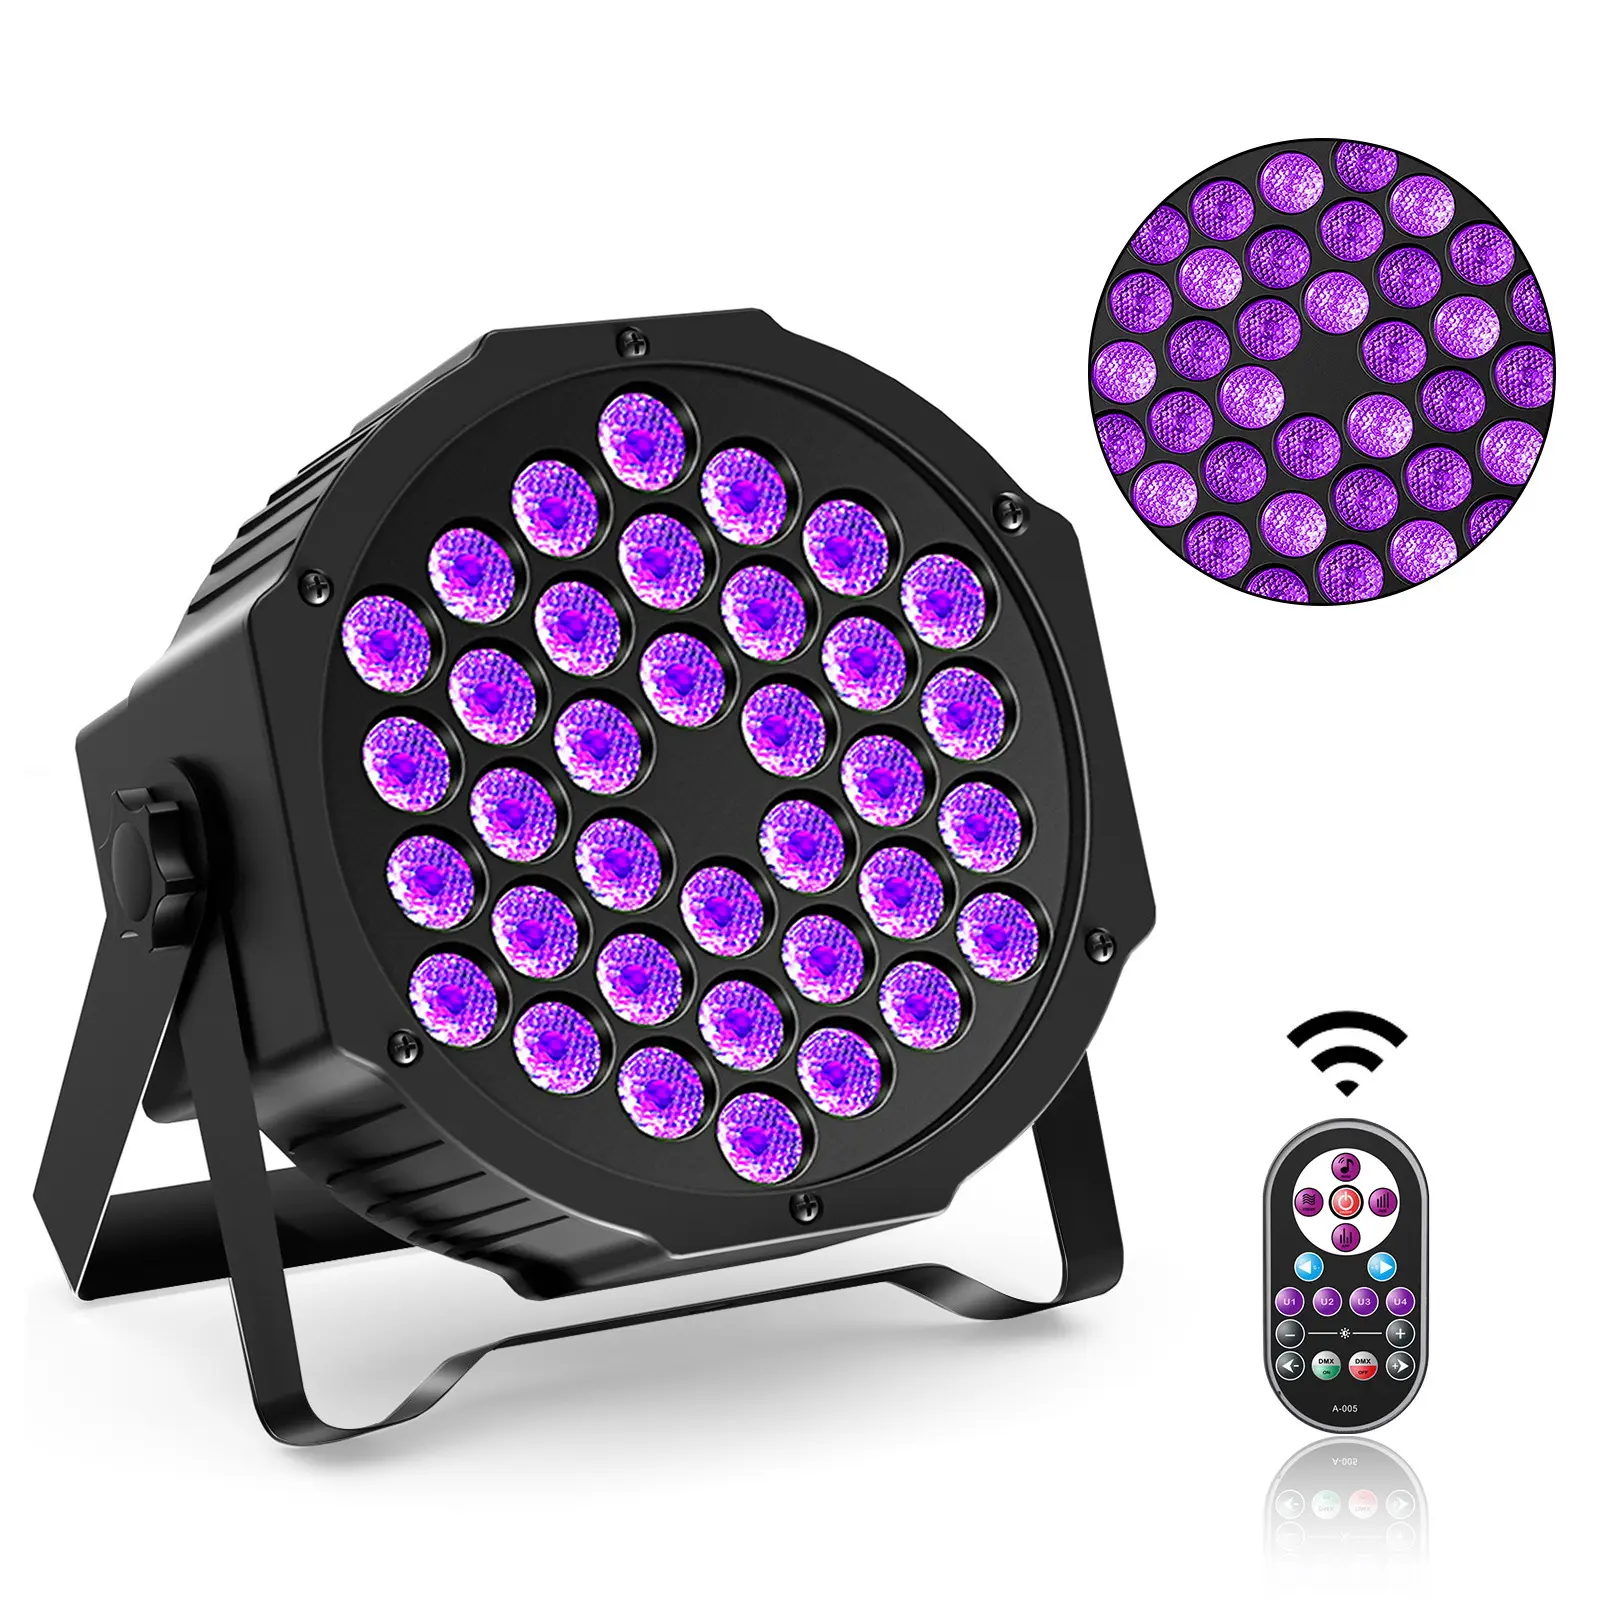 UV Disco Light Ultraviolet LED Strobe Dimming Mini Stage Lights Purple Lamp Projector for Small Party Pub DJ Club